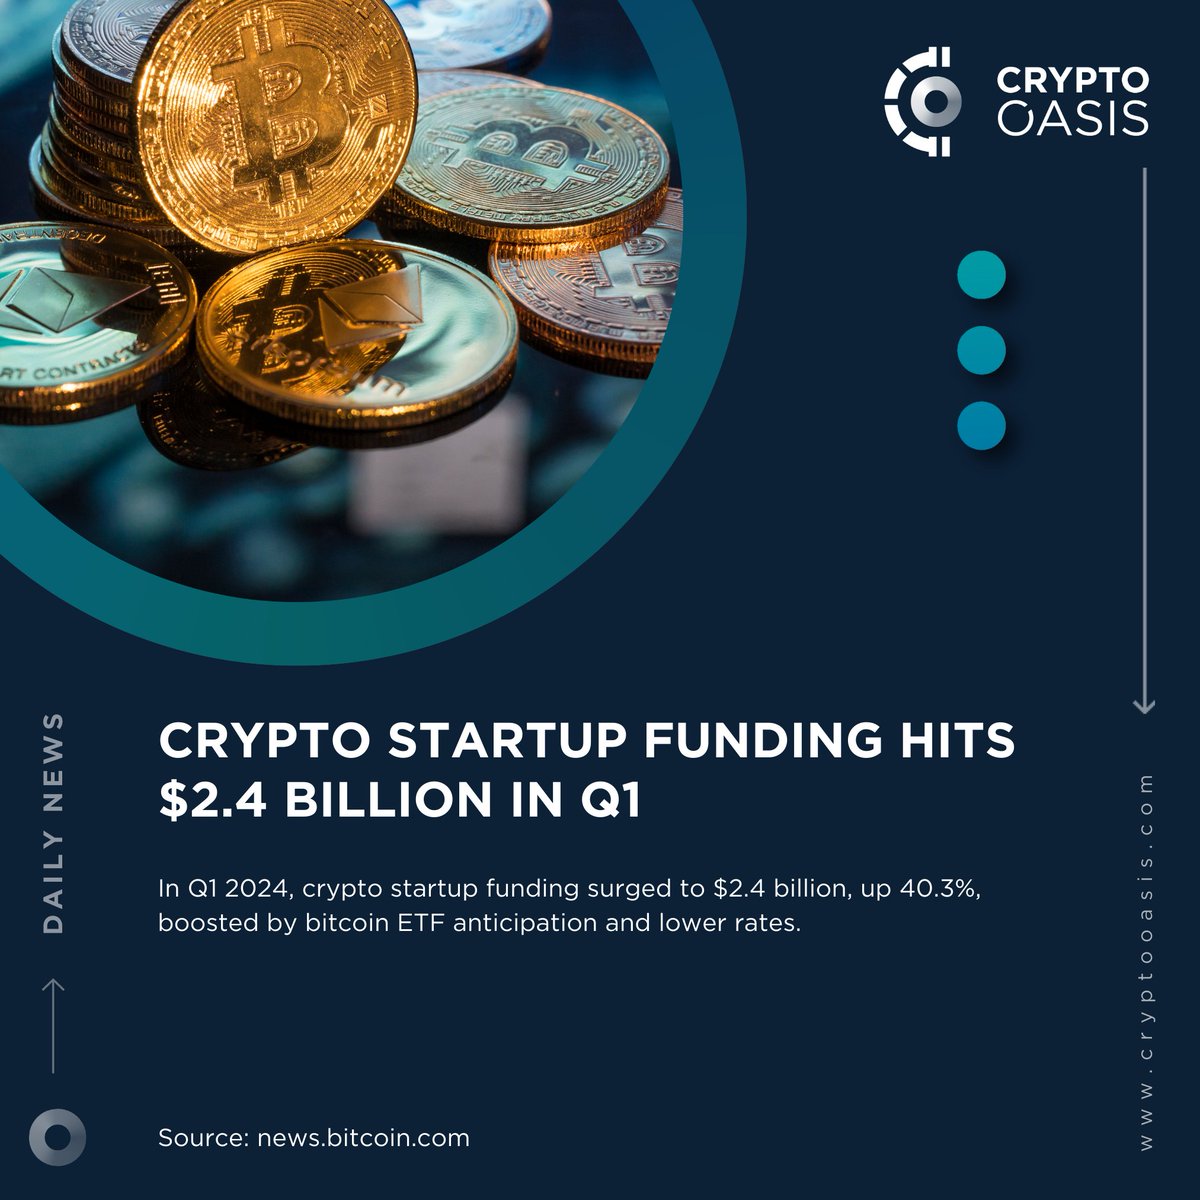 📢 Crypto Oasis Daily News In Q1 2024, #crypto startup funding surged to $2.4 billion, up 40.3%, boosted by #bitcoin ETF anticipation and lower rates. Learn more: tinyurl.com/5yjuec9h Source: @BTCTN